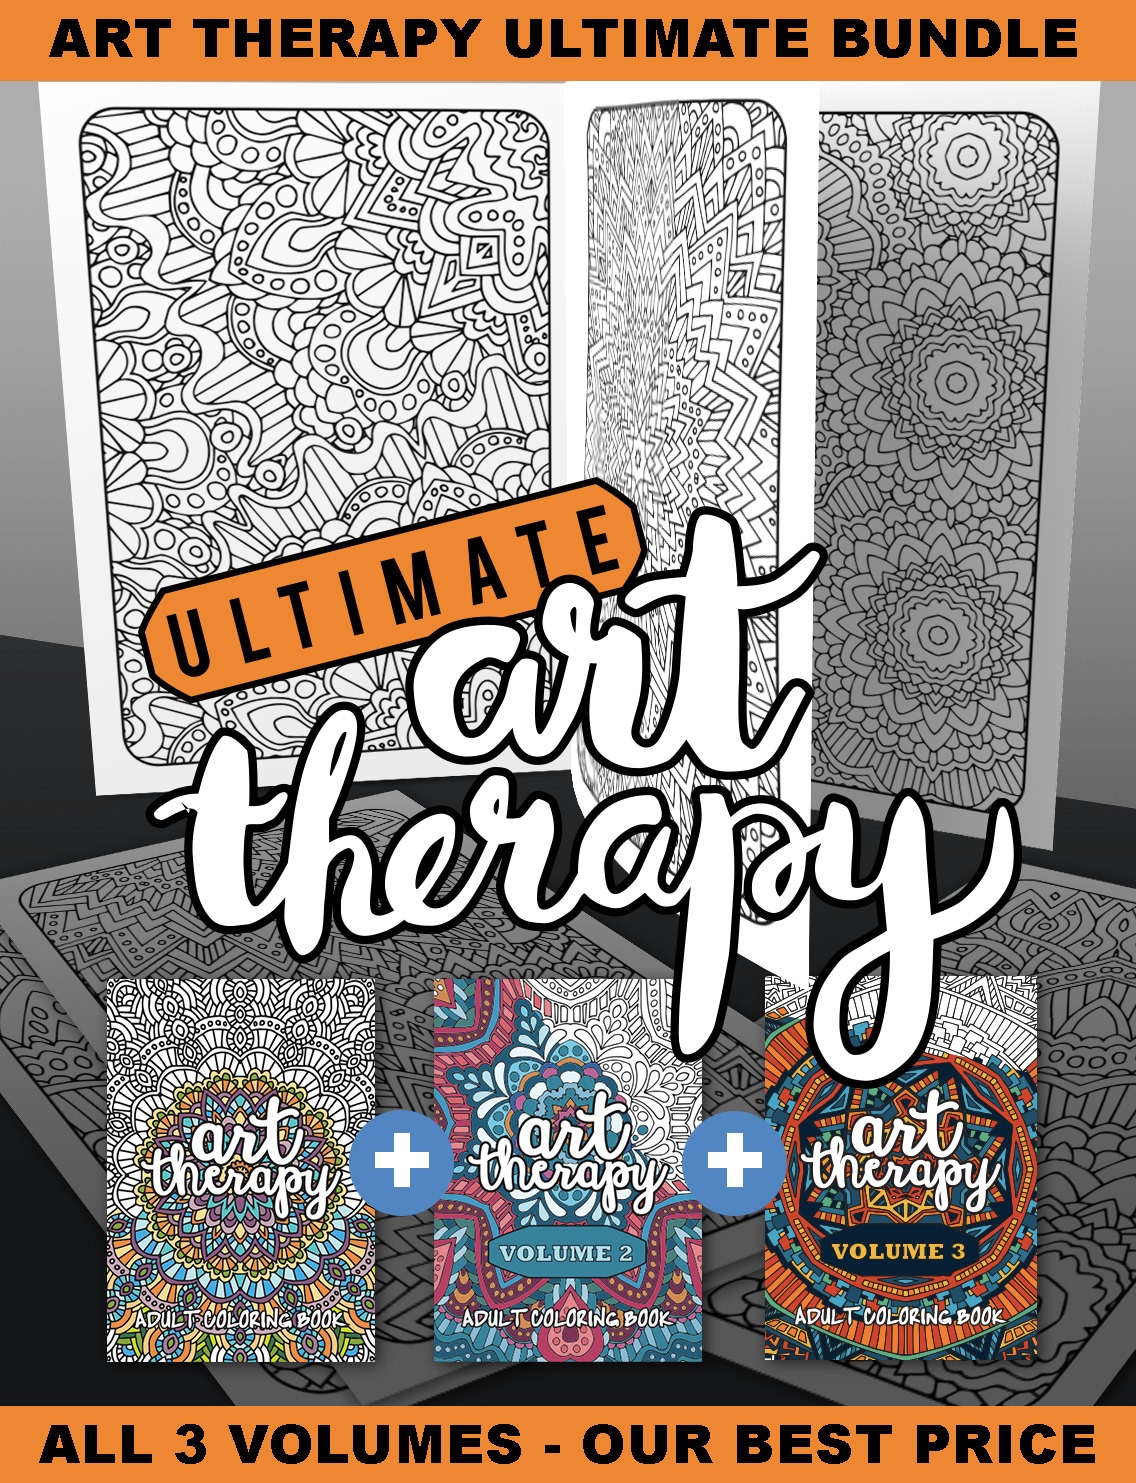 POCKET ART THERAPY: VOLUME 1: A POCKET-SIZED ADULT By Sarah Renae Clark  **NEW** 9781535446761